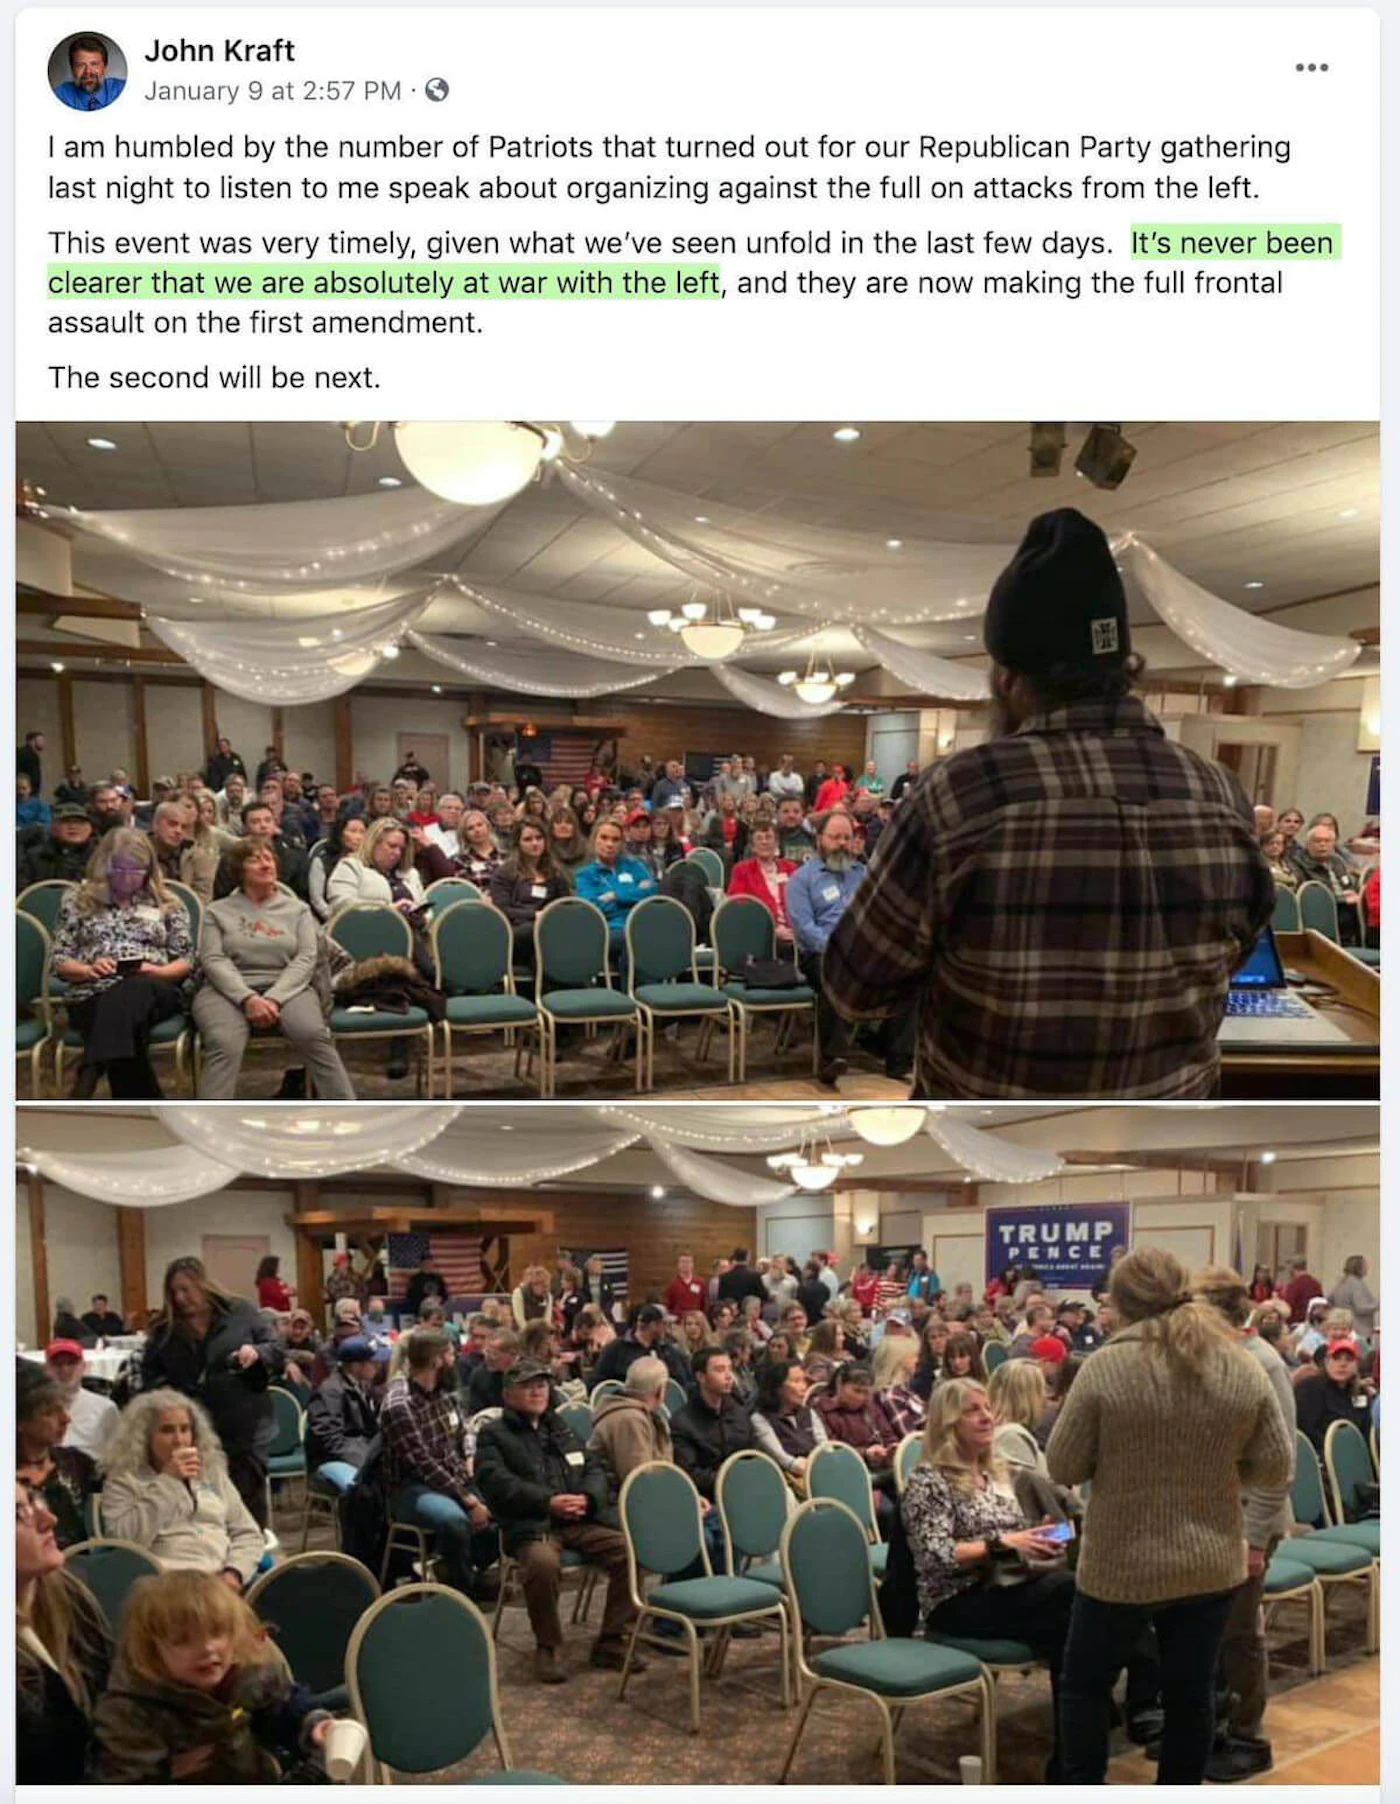 John Kraft, chairman of the St.Croix County Republican Party, made this post on his Facebook page following a party gathering on Jan. 8 designed to discuss what he termed “full-on attacks” from Democrats.